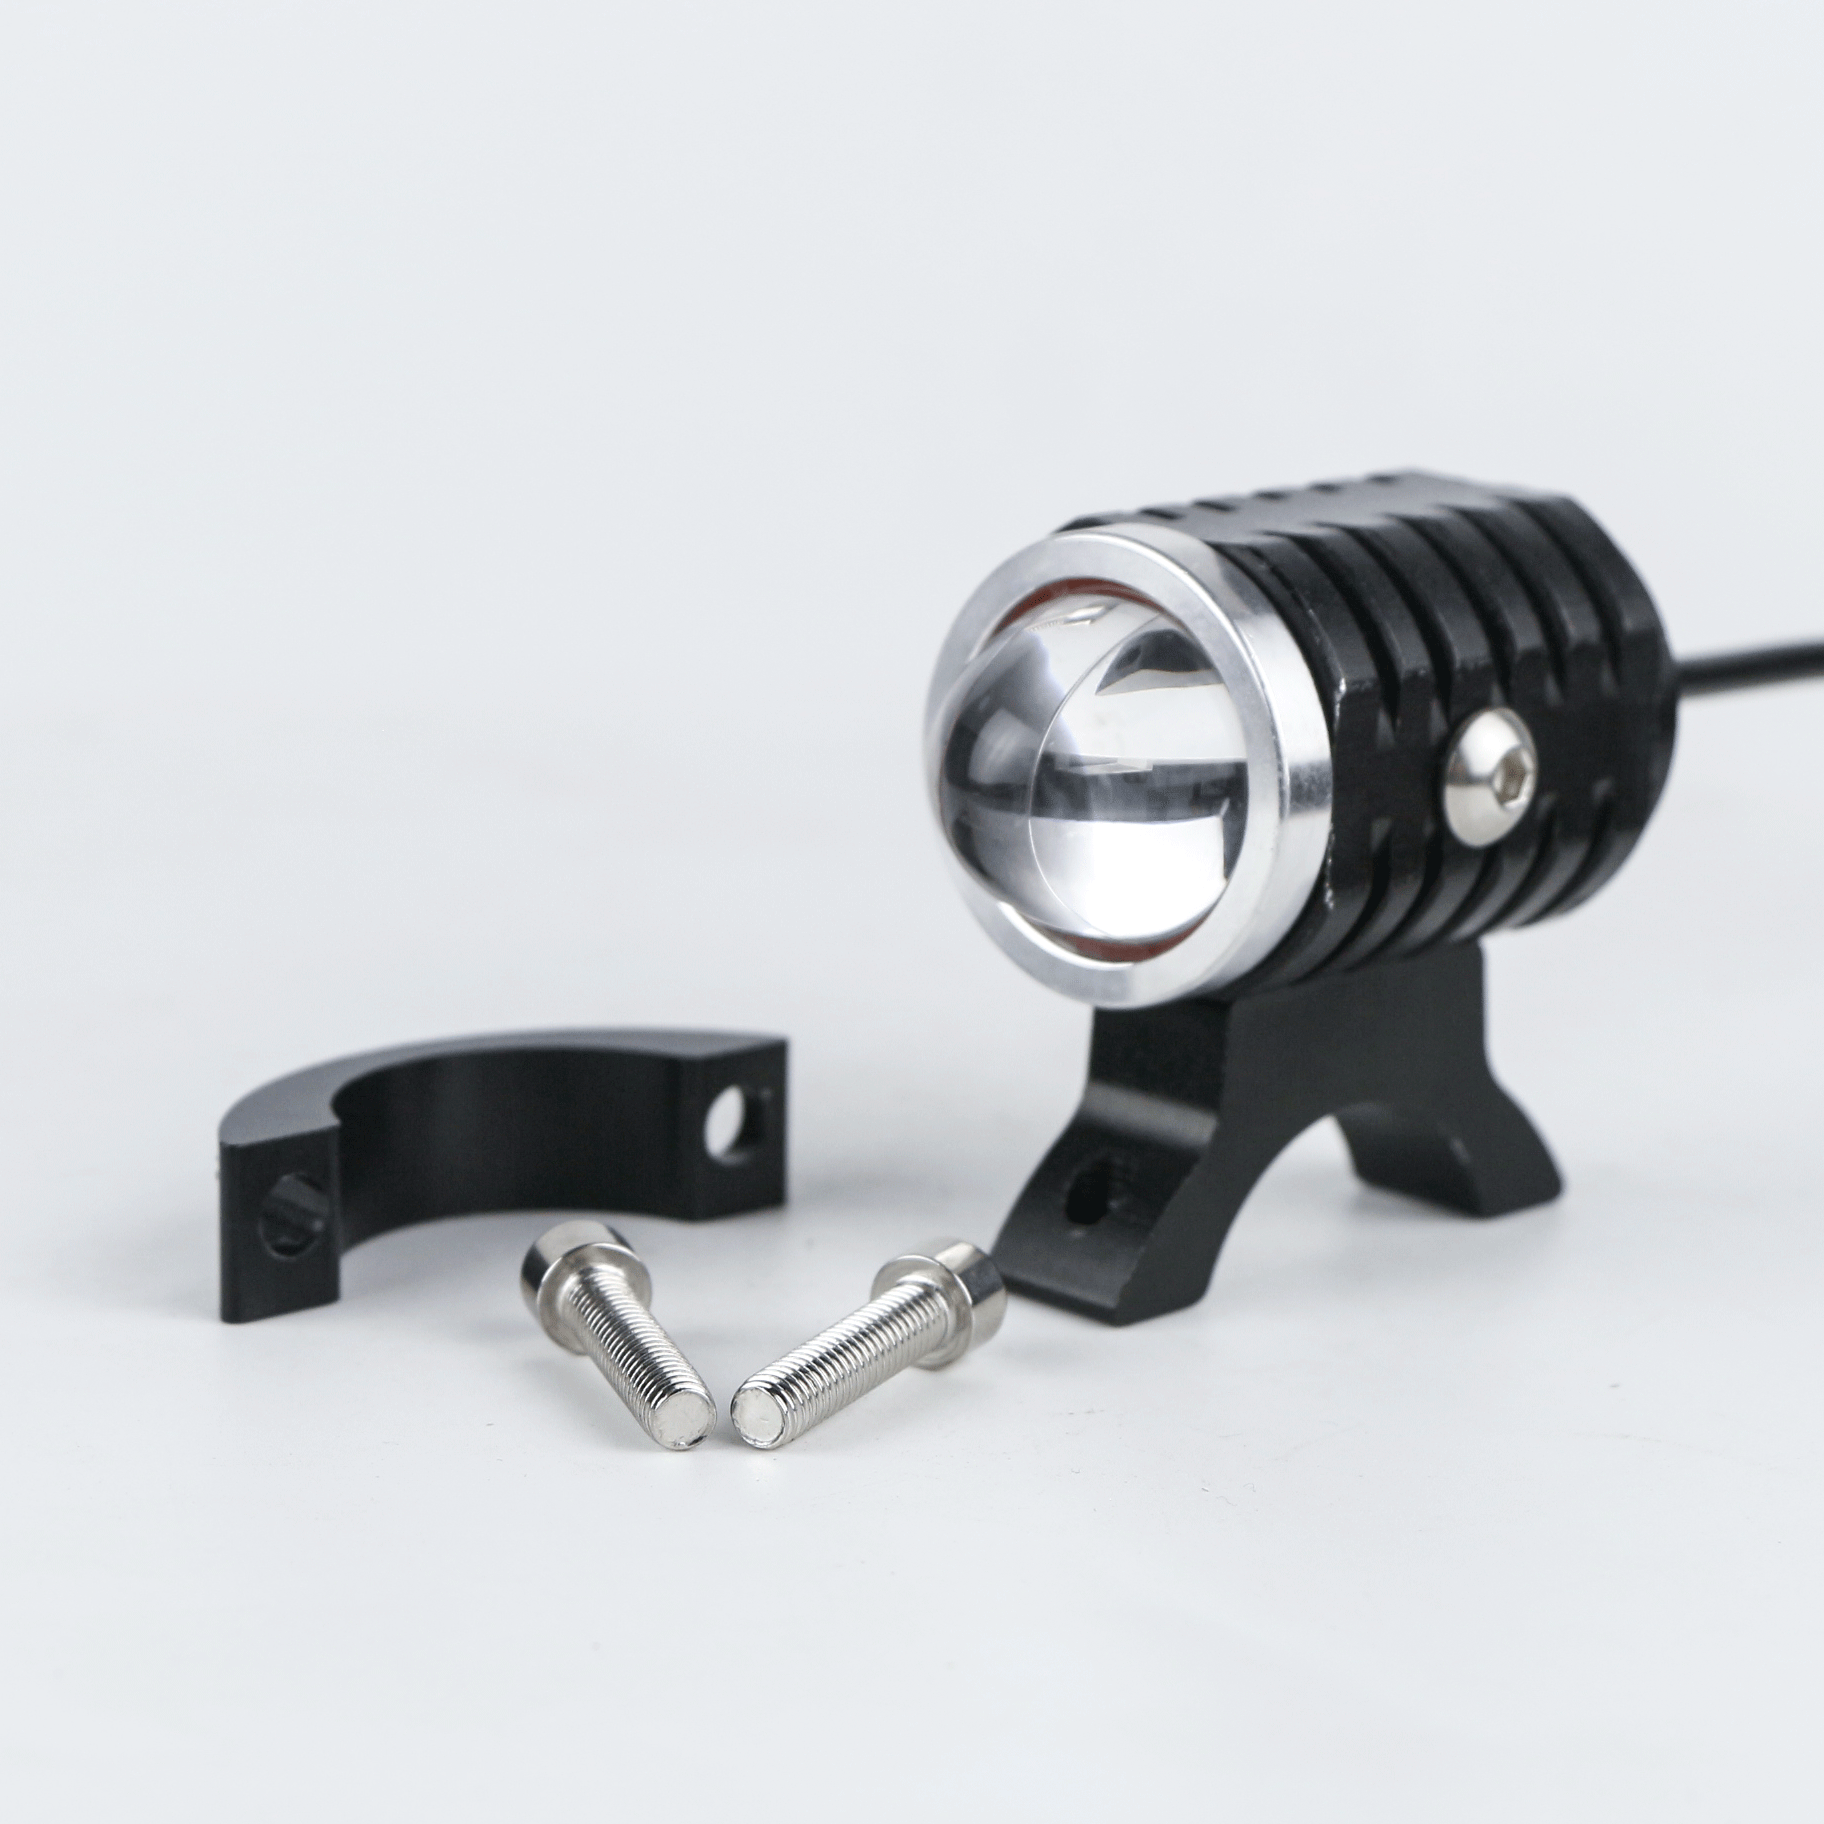 2 Inch Tricolor LED Motorcycle Spotlight